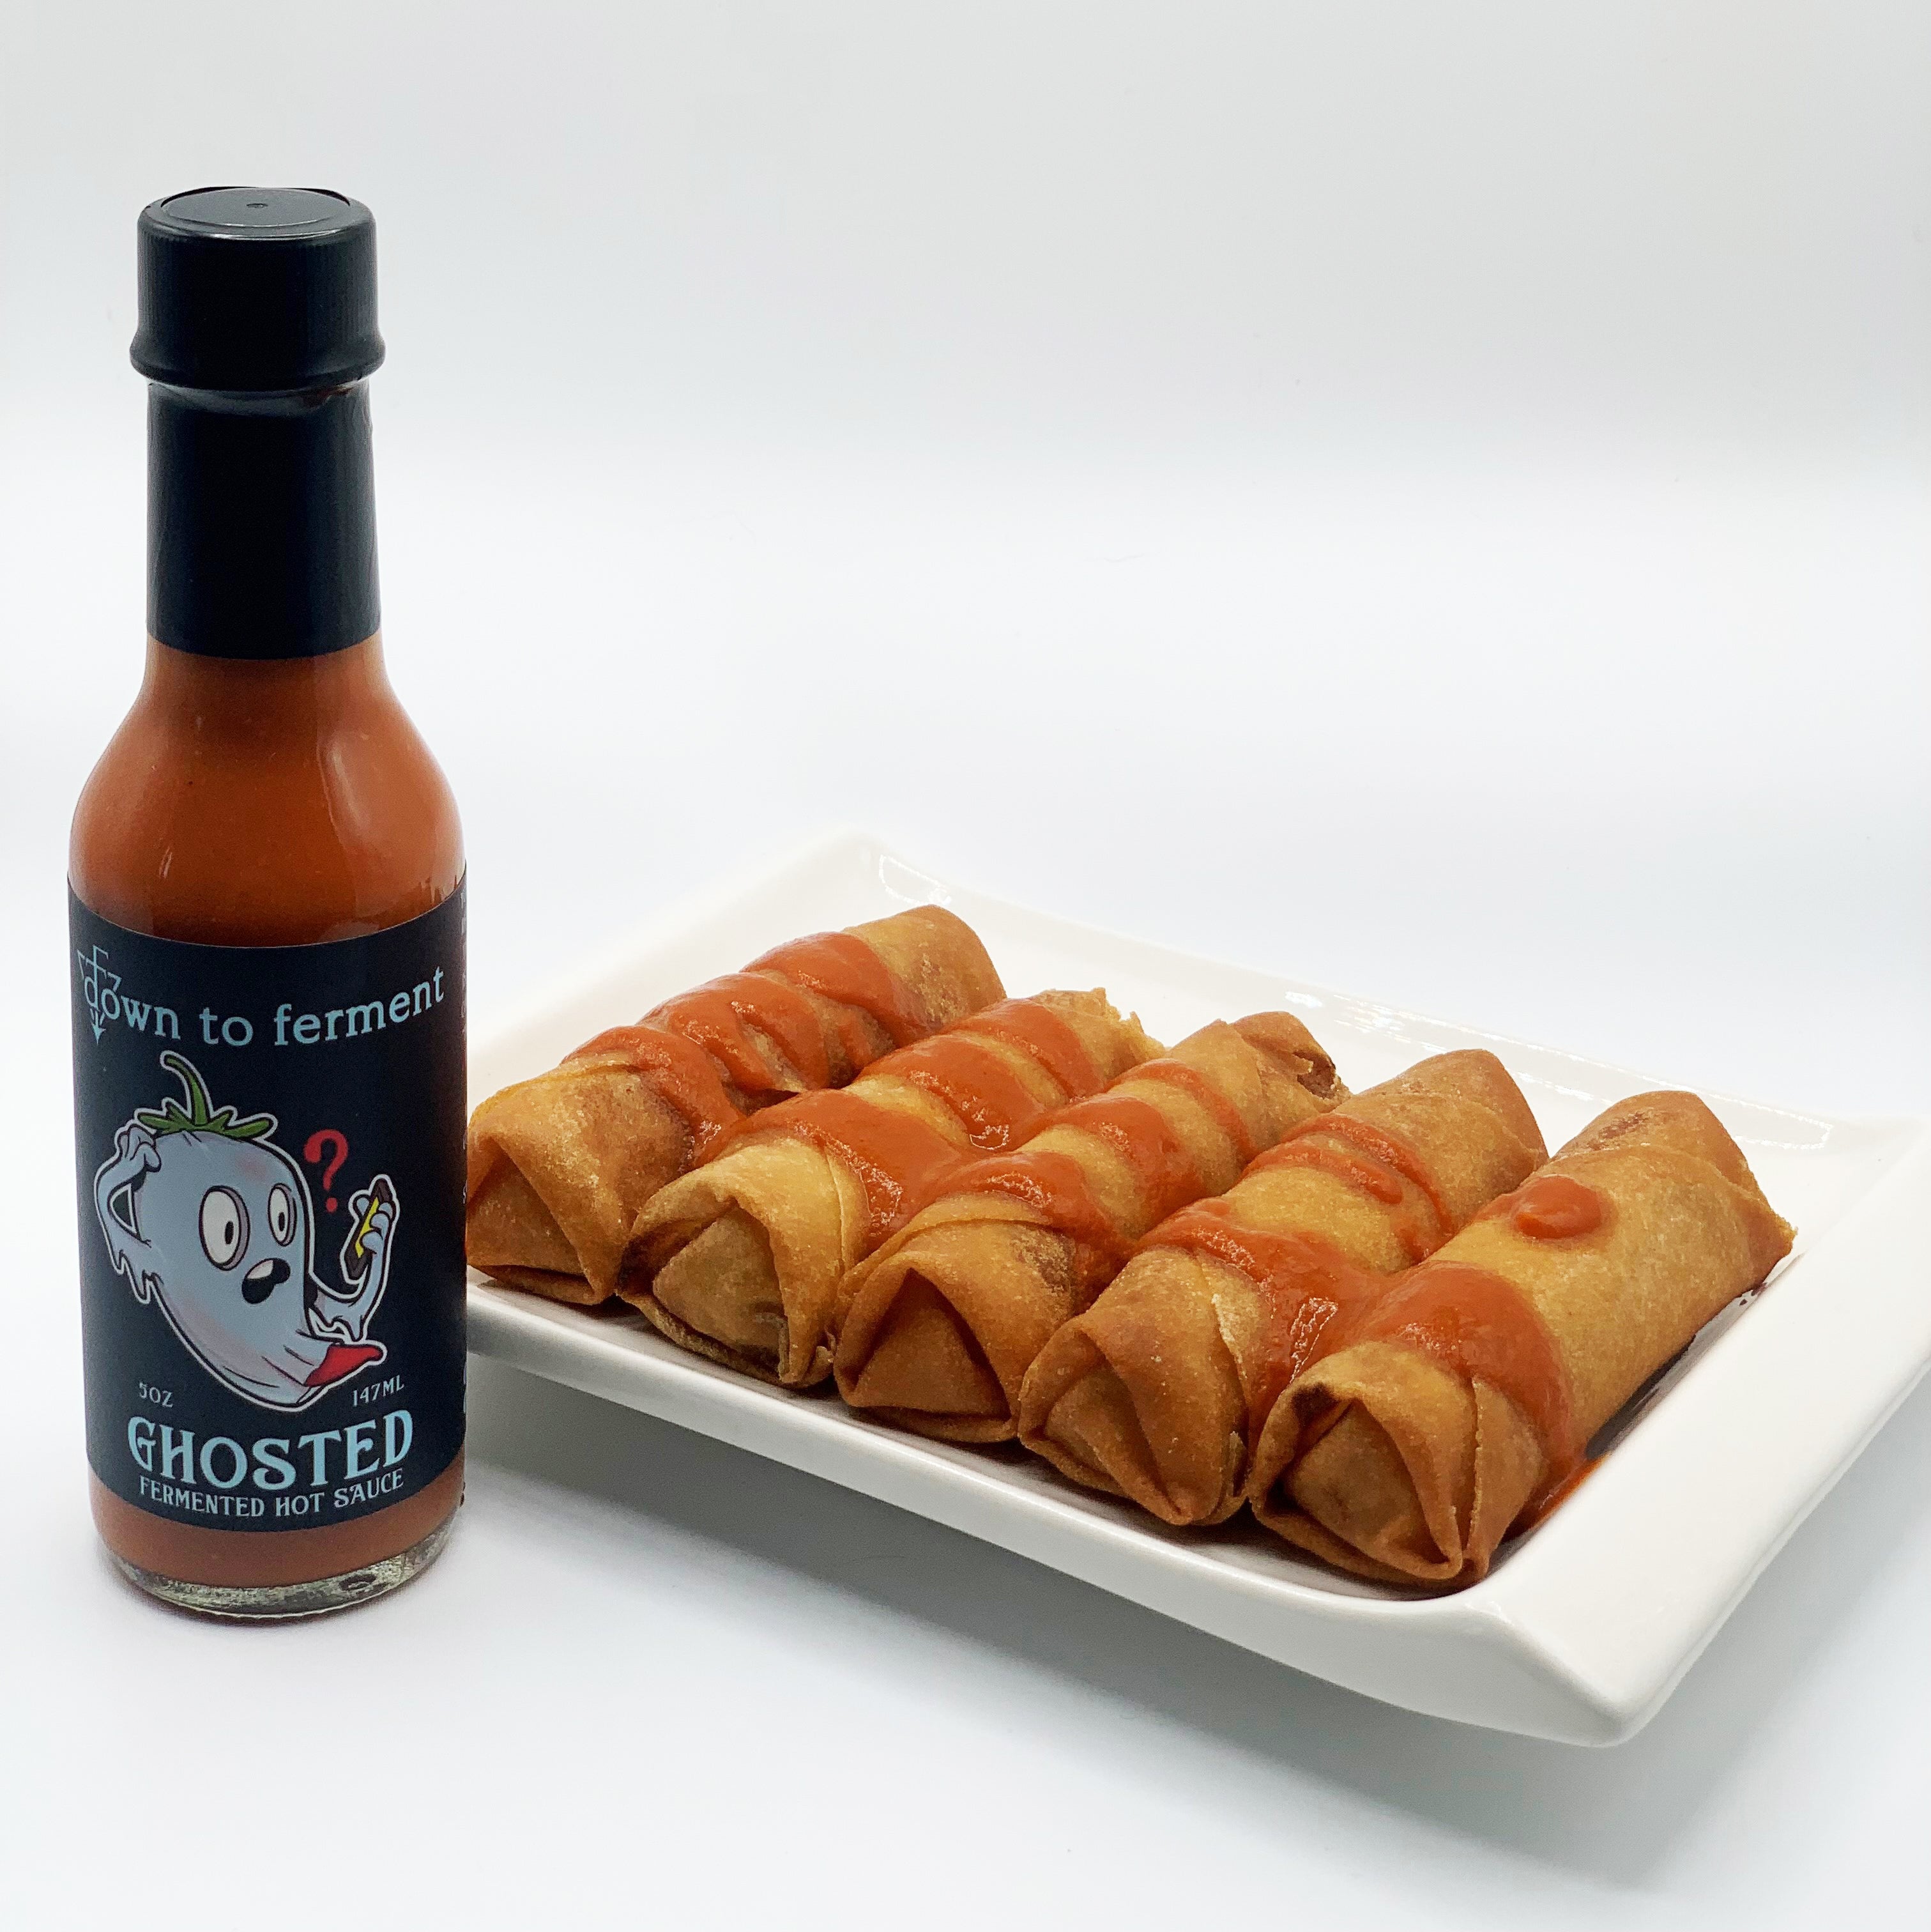 Ghosted Hot Sauce, Down To Ferment Vegan Hot Sauce. San Diego's Hot Sauce